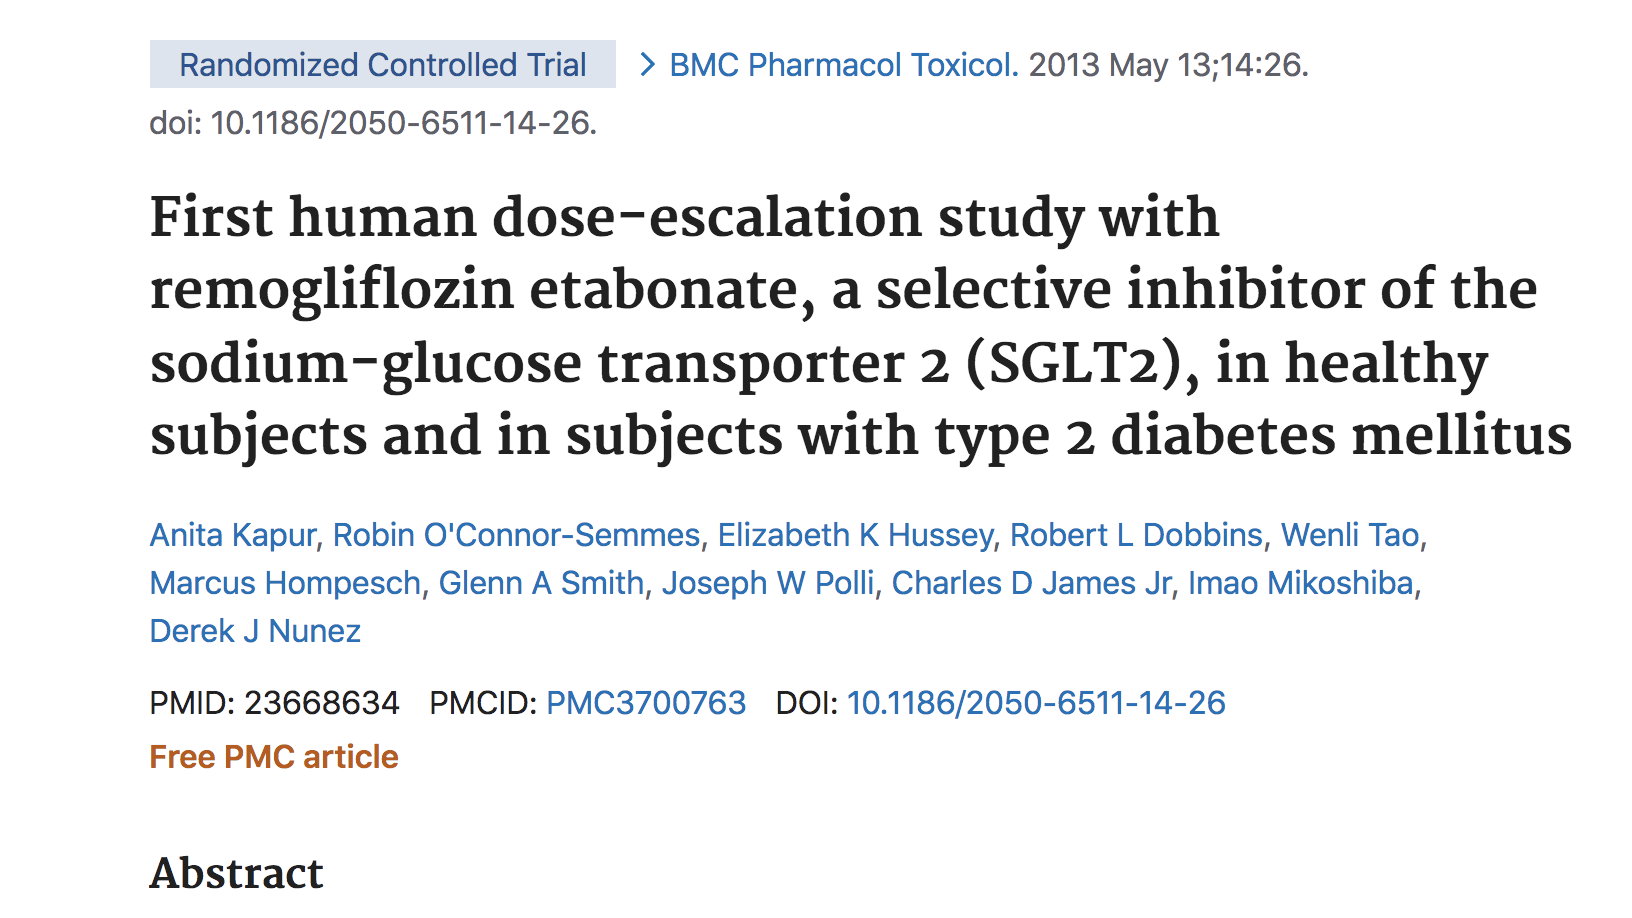 image of First human dose-escalation study with remogliflozin etabonate, a selective inhibitor of the sodium-glucose transporter 2 (SGLT2), in healthy subjects and in subjects with type 2 diabetes mellitus.